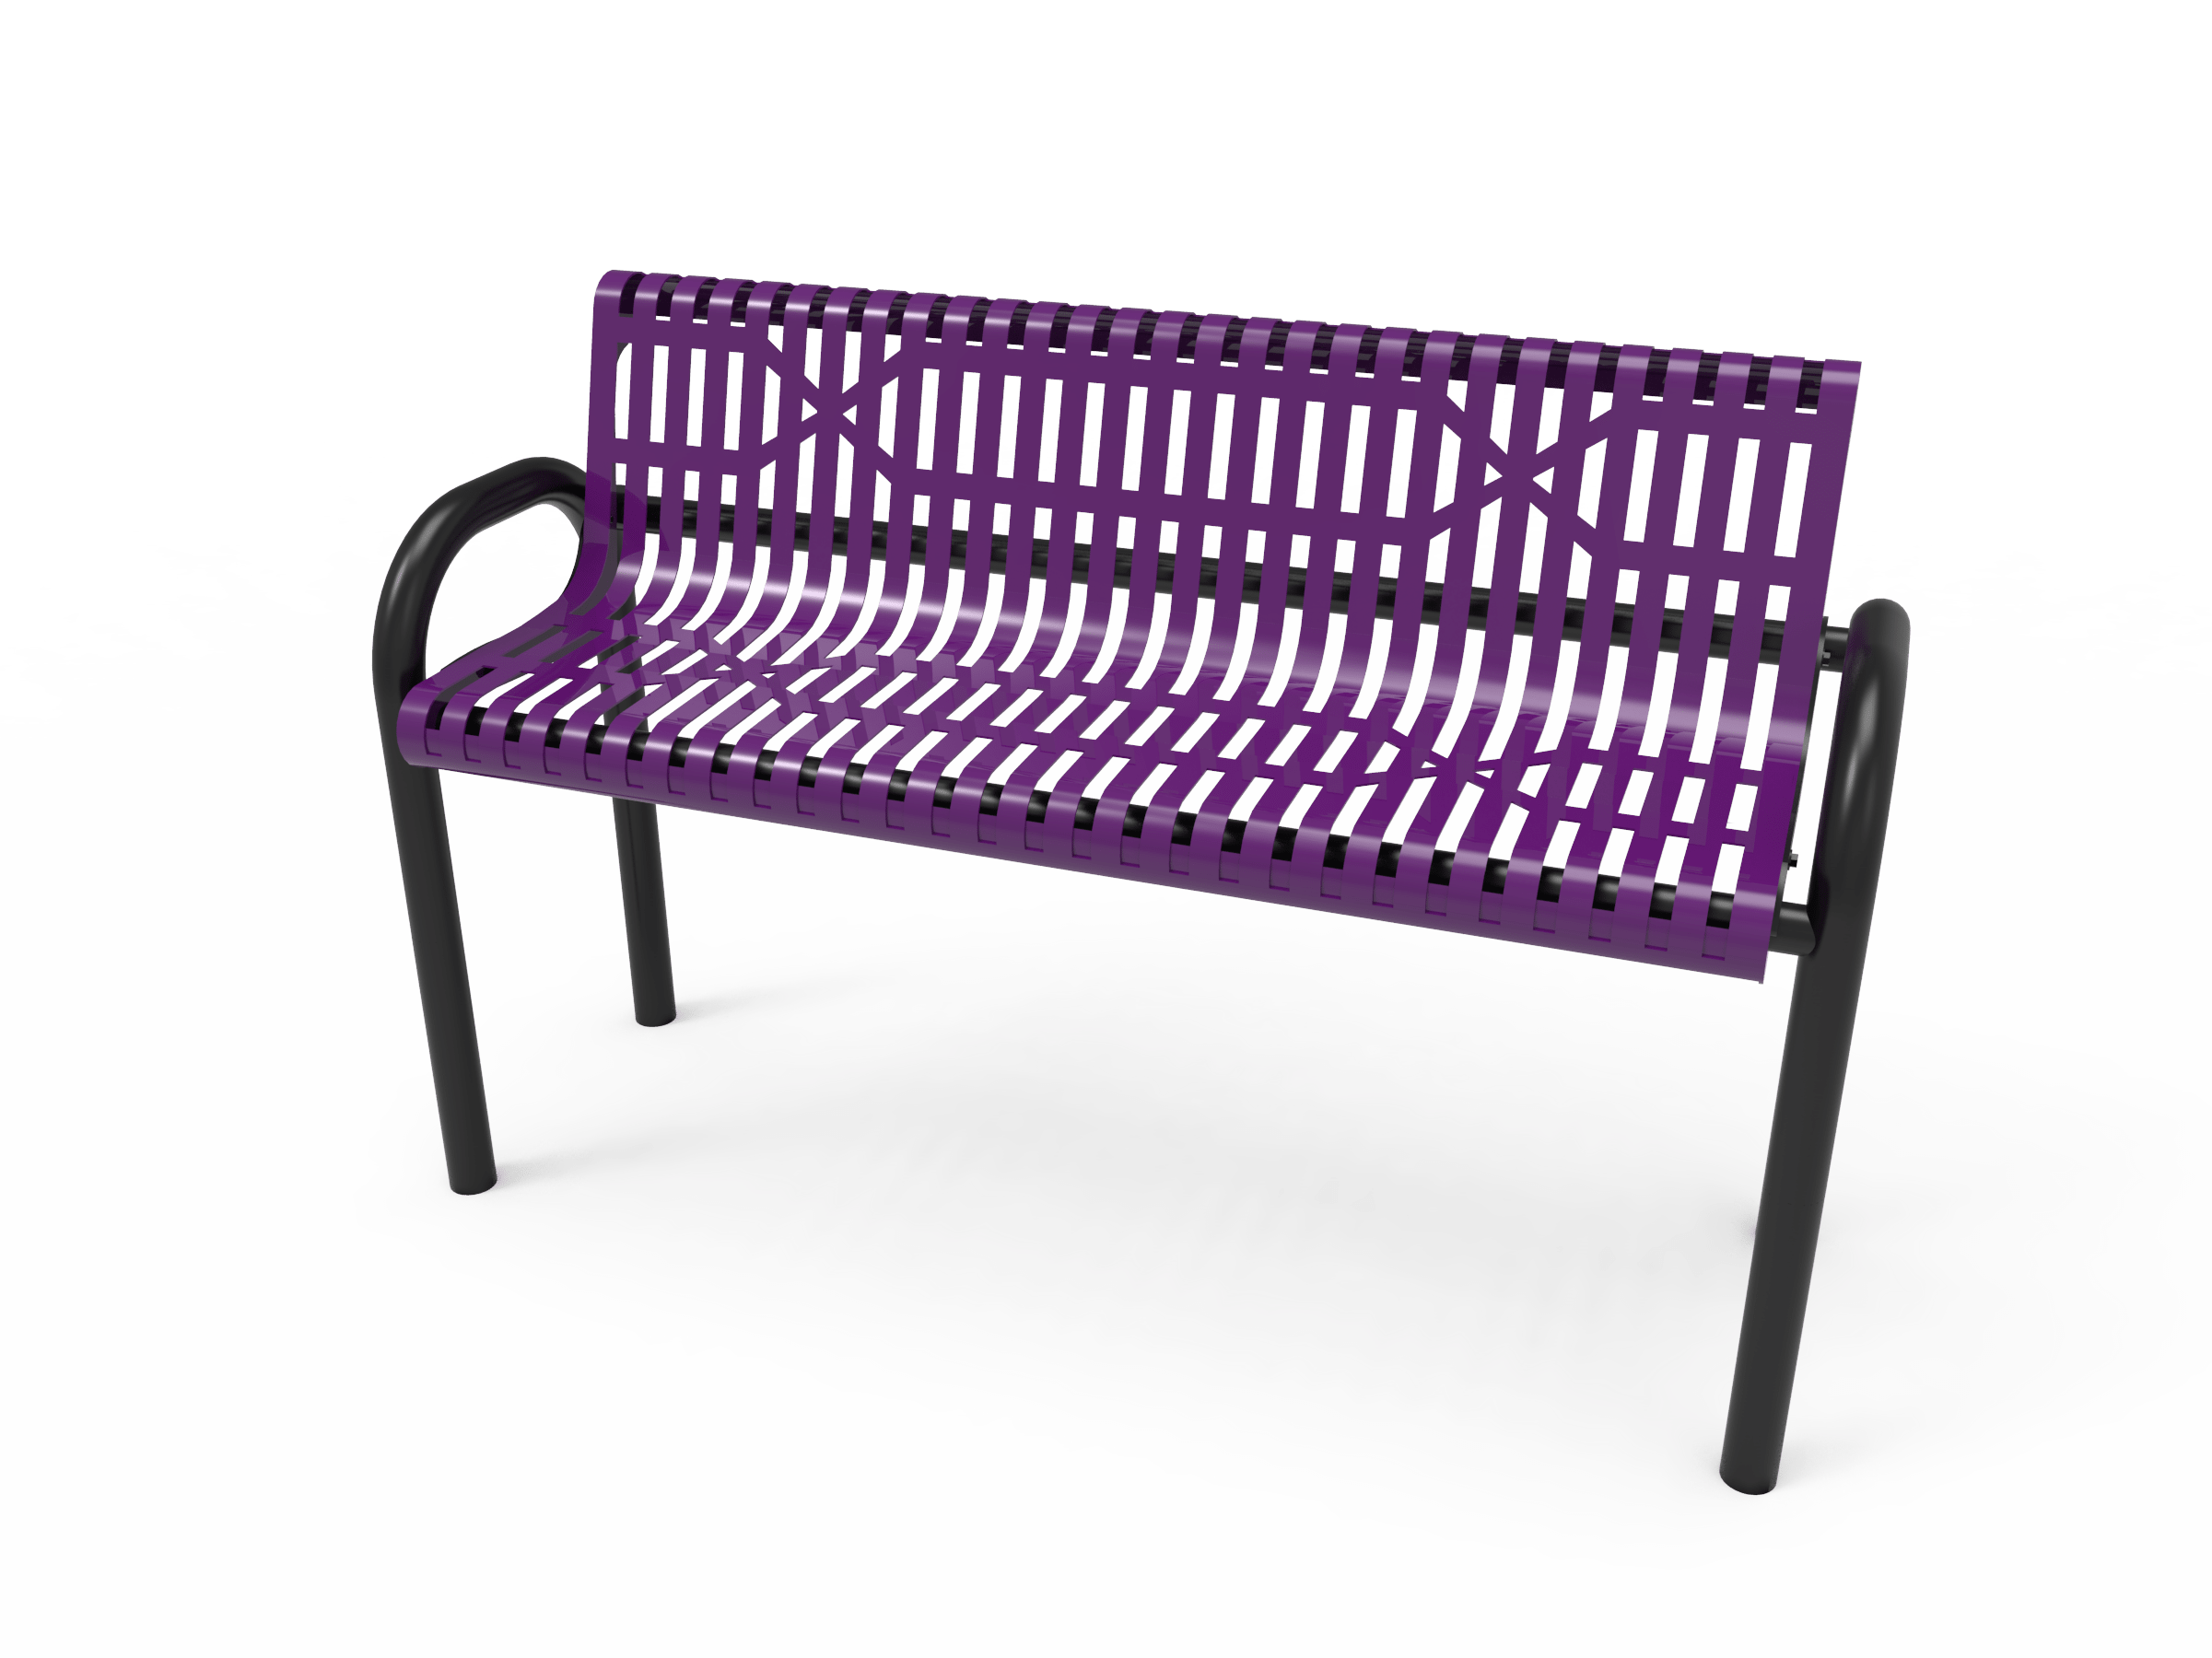 6′ Bench With Back In Ground-Slat
BMD06-F-53-000
Industry Standard Finish
$1349.00
BMD06-E-53-000
Advantage Premium Finish
$1689.00
